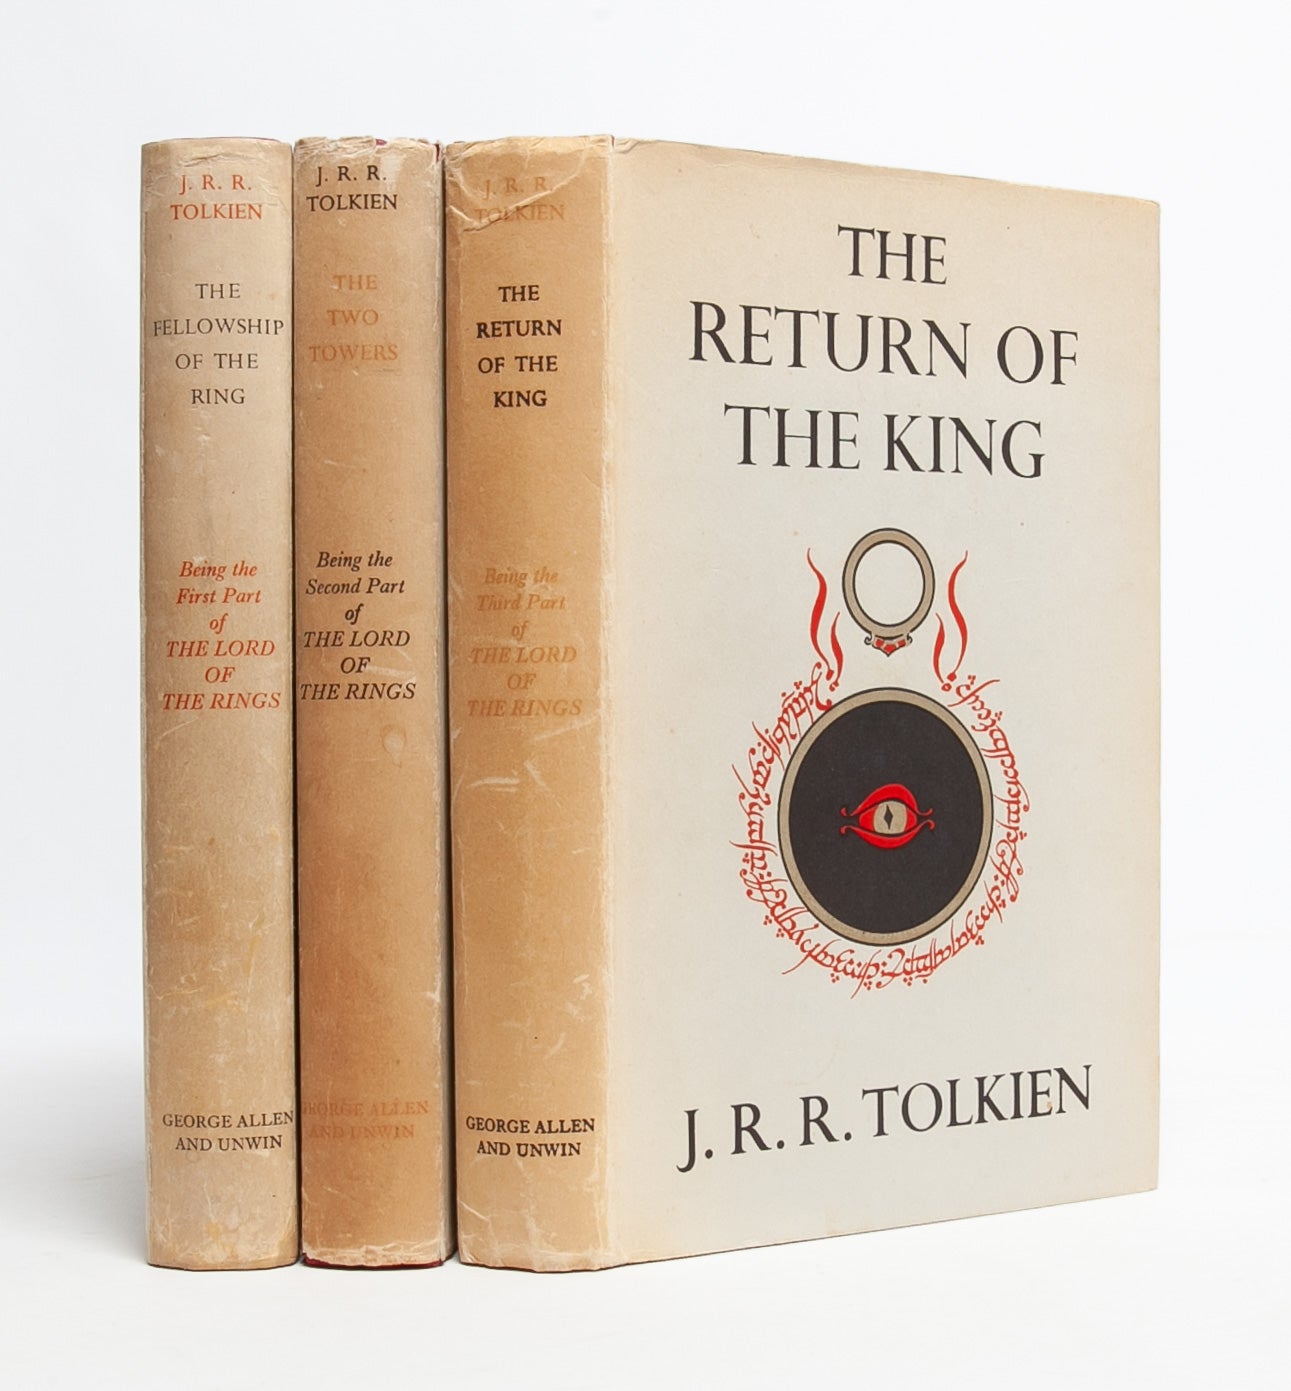 (Item #5959) The Lord of the Rings Trilogy, comprised of: The Fellowship of the Ring; The Two Towers and The Return of the King. J. R. R. Tolkien.